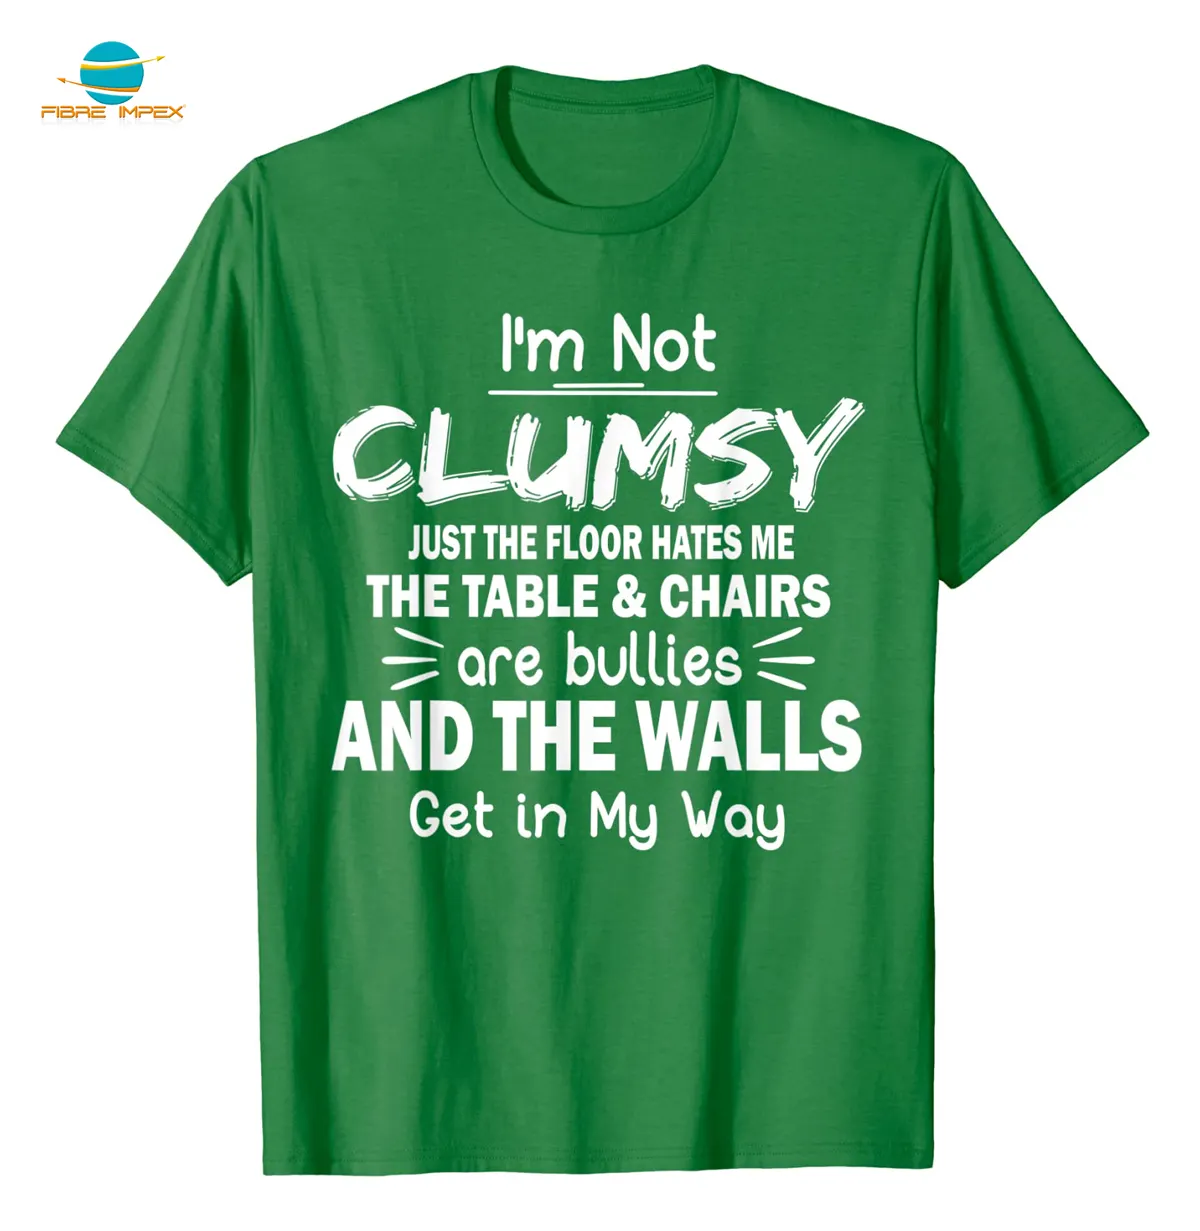 Unisex t-shirts I'm Not Clumsy Funny Sayings Sarcastic Gifts Men Women Kids T Shirts custom made logo design